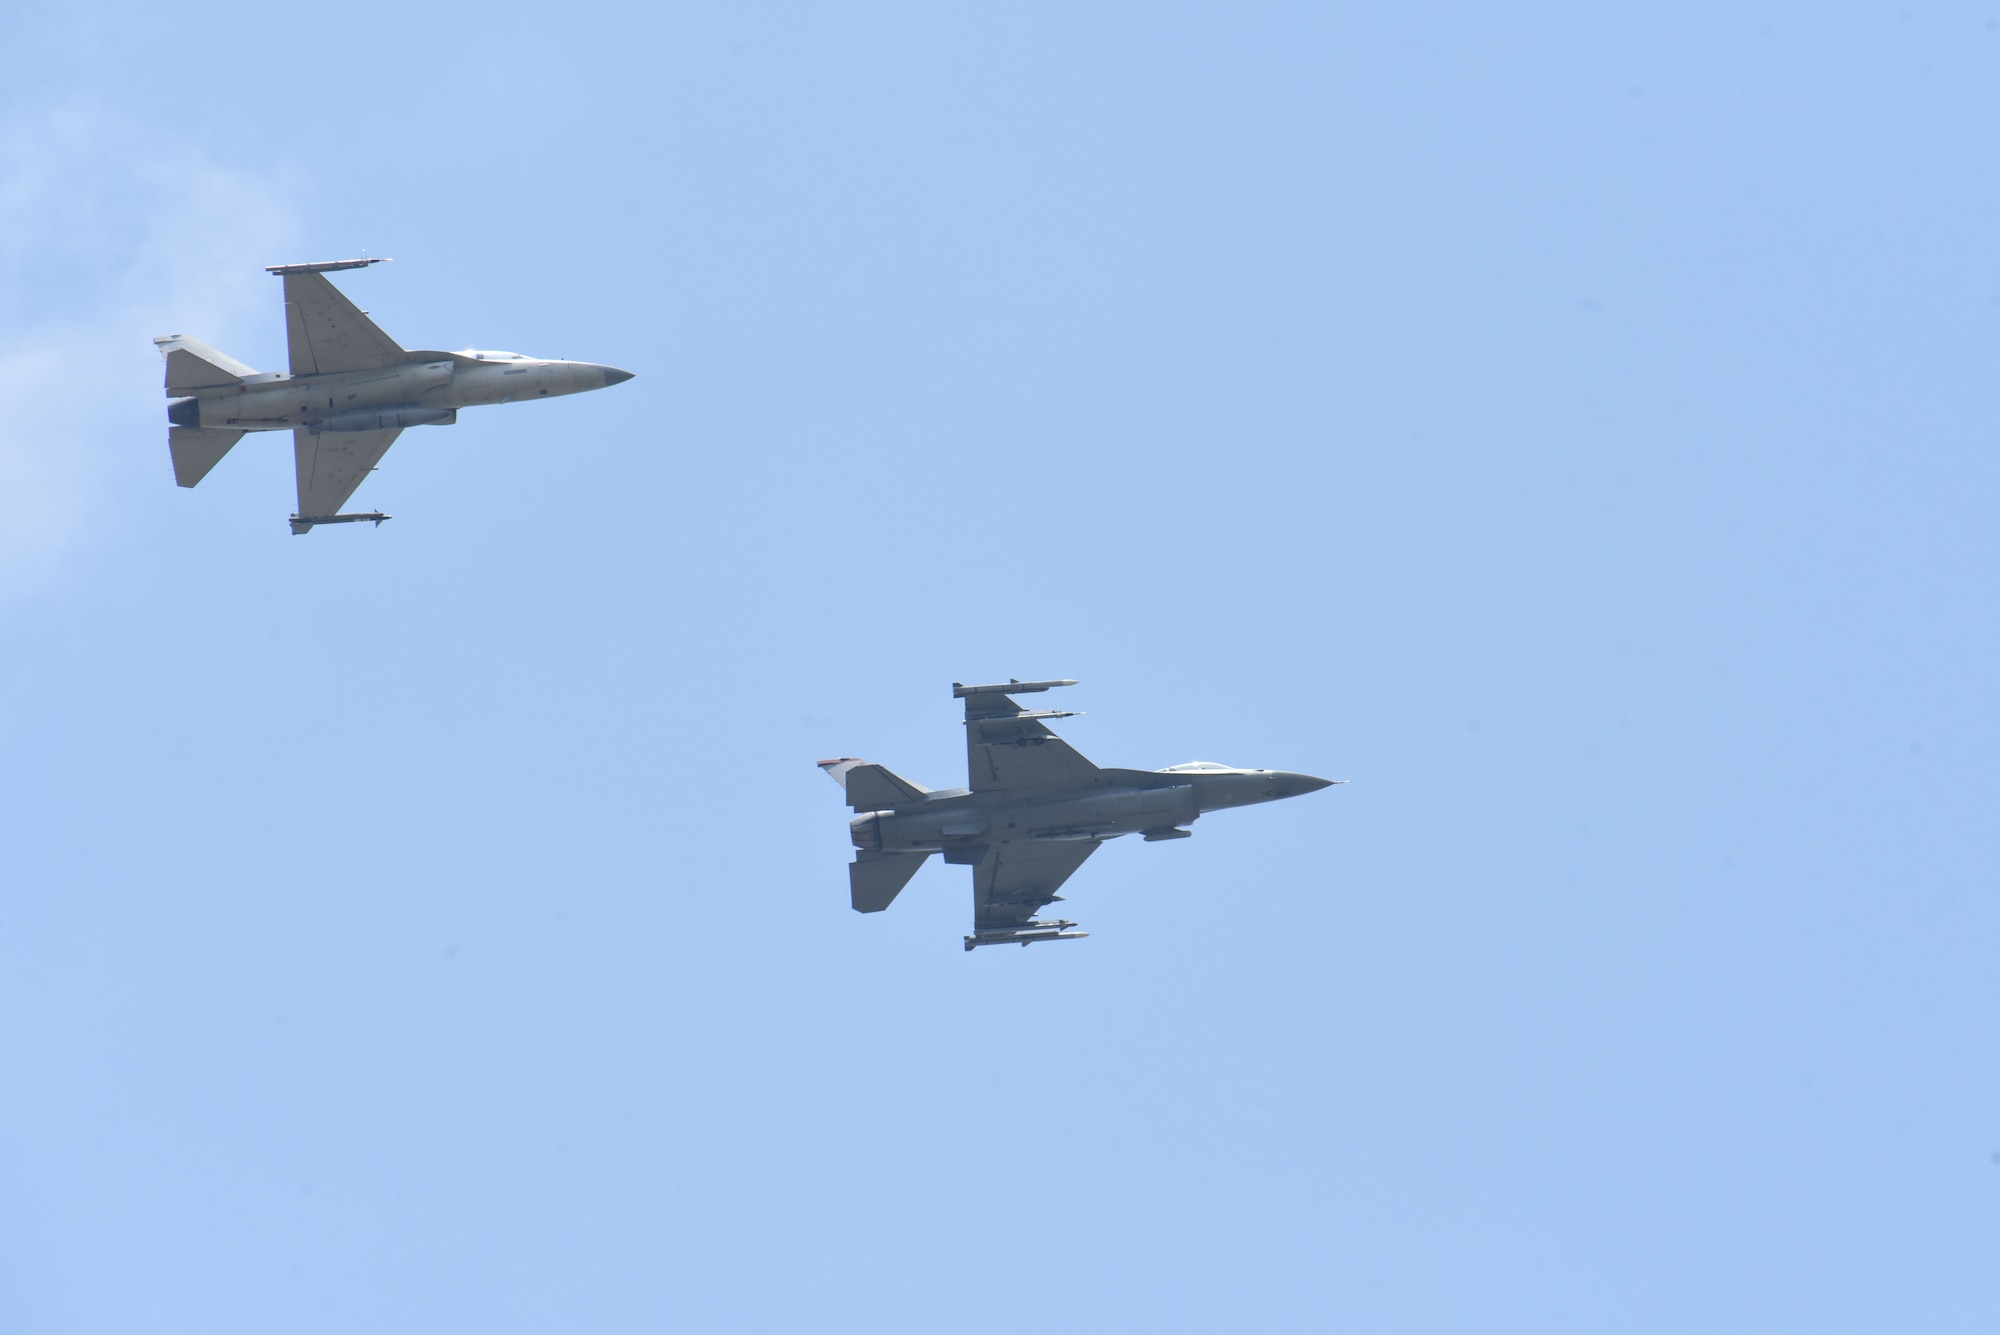 An U.S. Air Force F-16 Fighting Falcon and a Philippine Air Force FA-50 fly together as part of flight integration training at Basa Air Base, Philippines during Cope Thunder 24-1, Apr. 11, 2024. Through the bilateral training opportunity, Cope Thunder 24-1, the United States and Philippines continue enhancing their collective readiness and deterrence of present and future challenges. (U.S. Air Force photo by Master Sgt. Darnell T. Cannady)